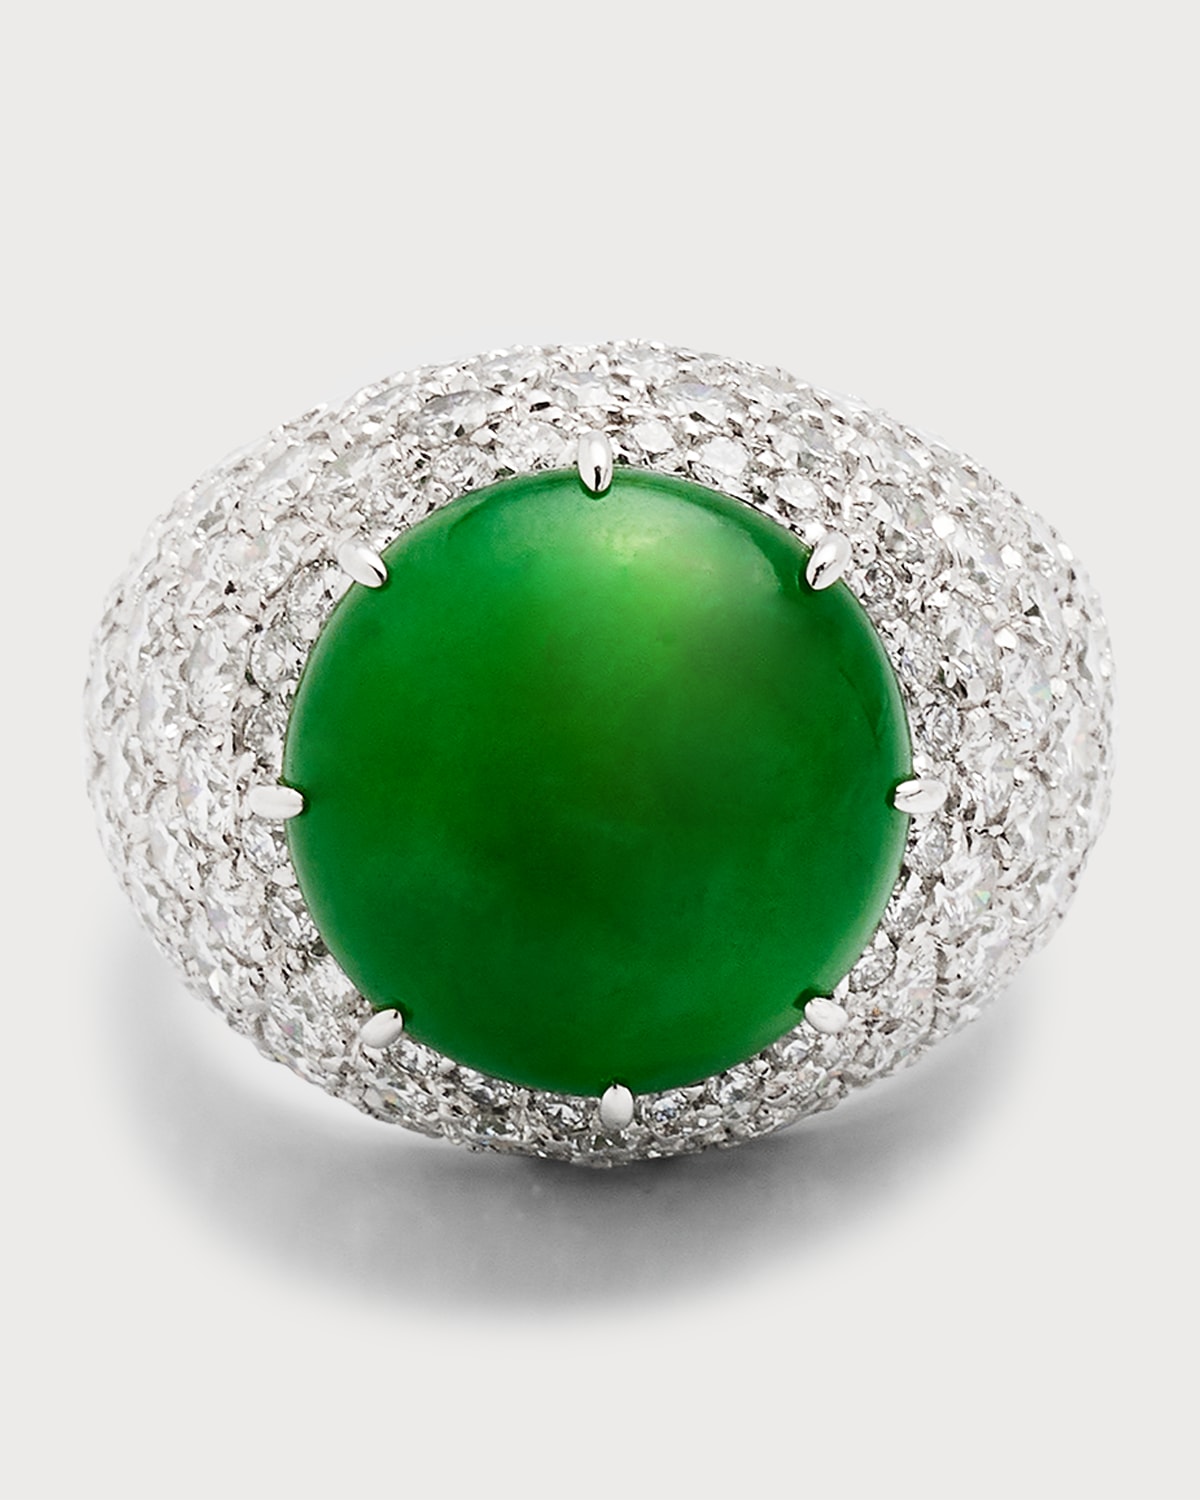 Jade and Pave Diamond Domed Cocktail Ring, Size 5